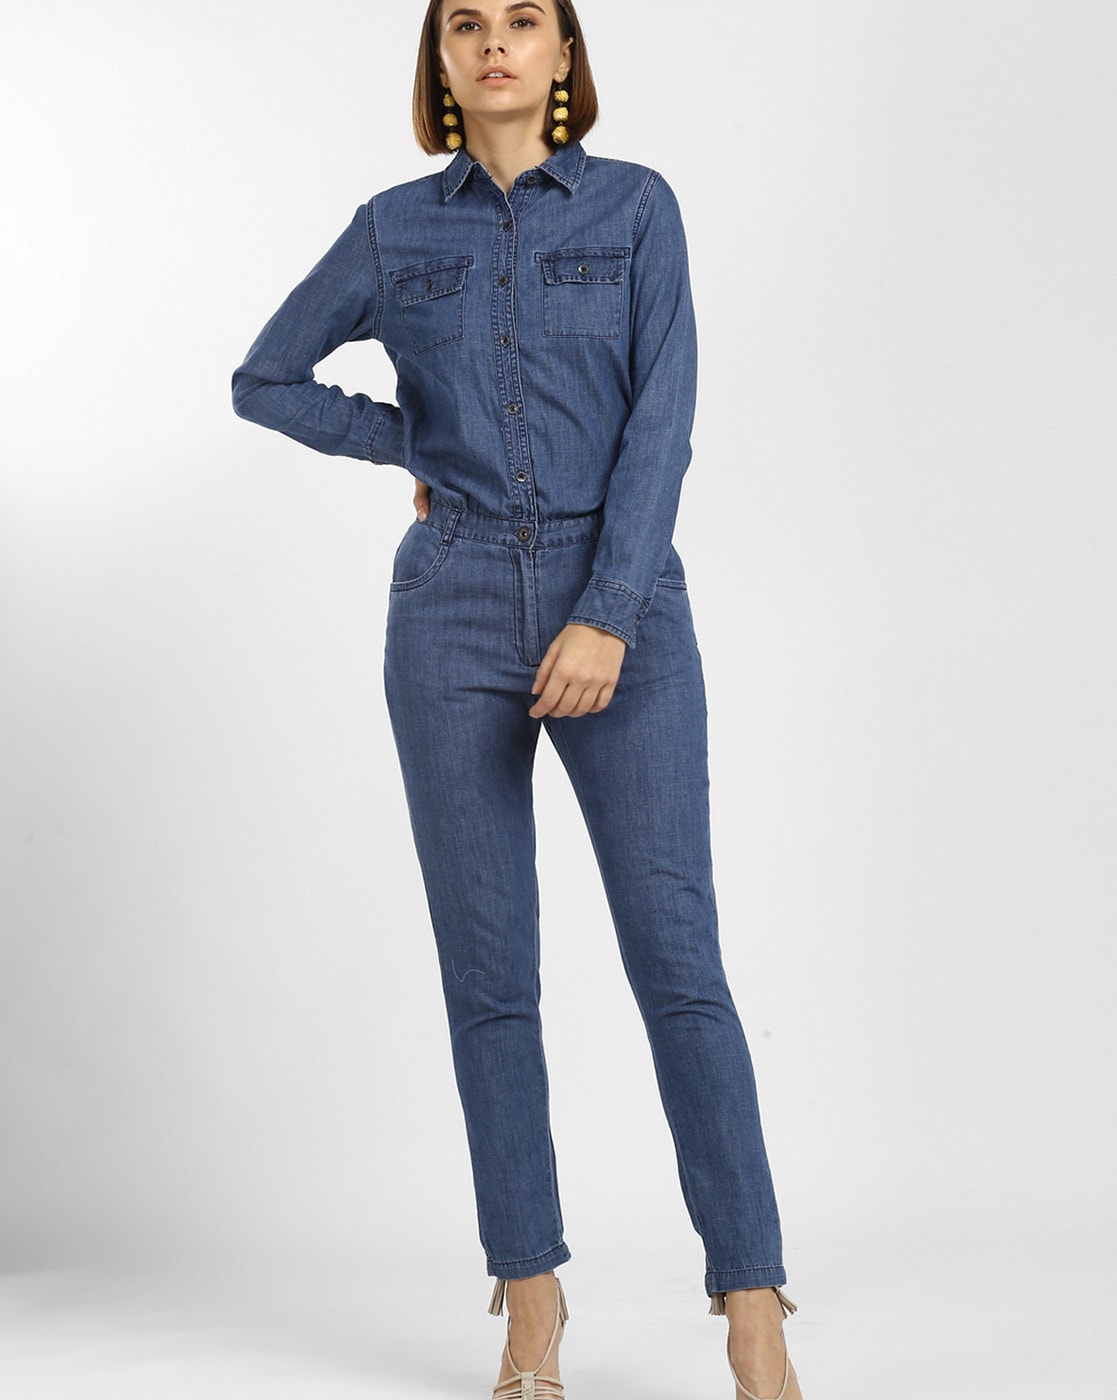 Buy Blue Dungarees &Playsuits for Girls by Pepe Jeans Online | Ajio.com